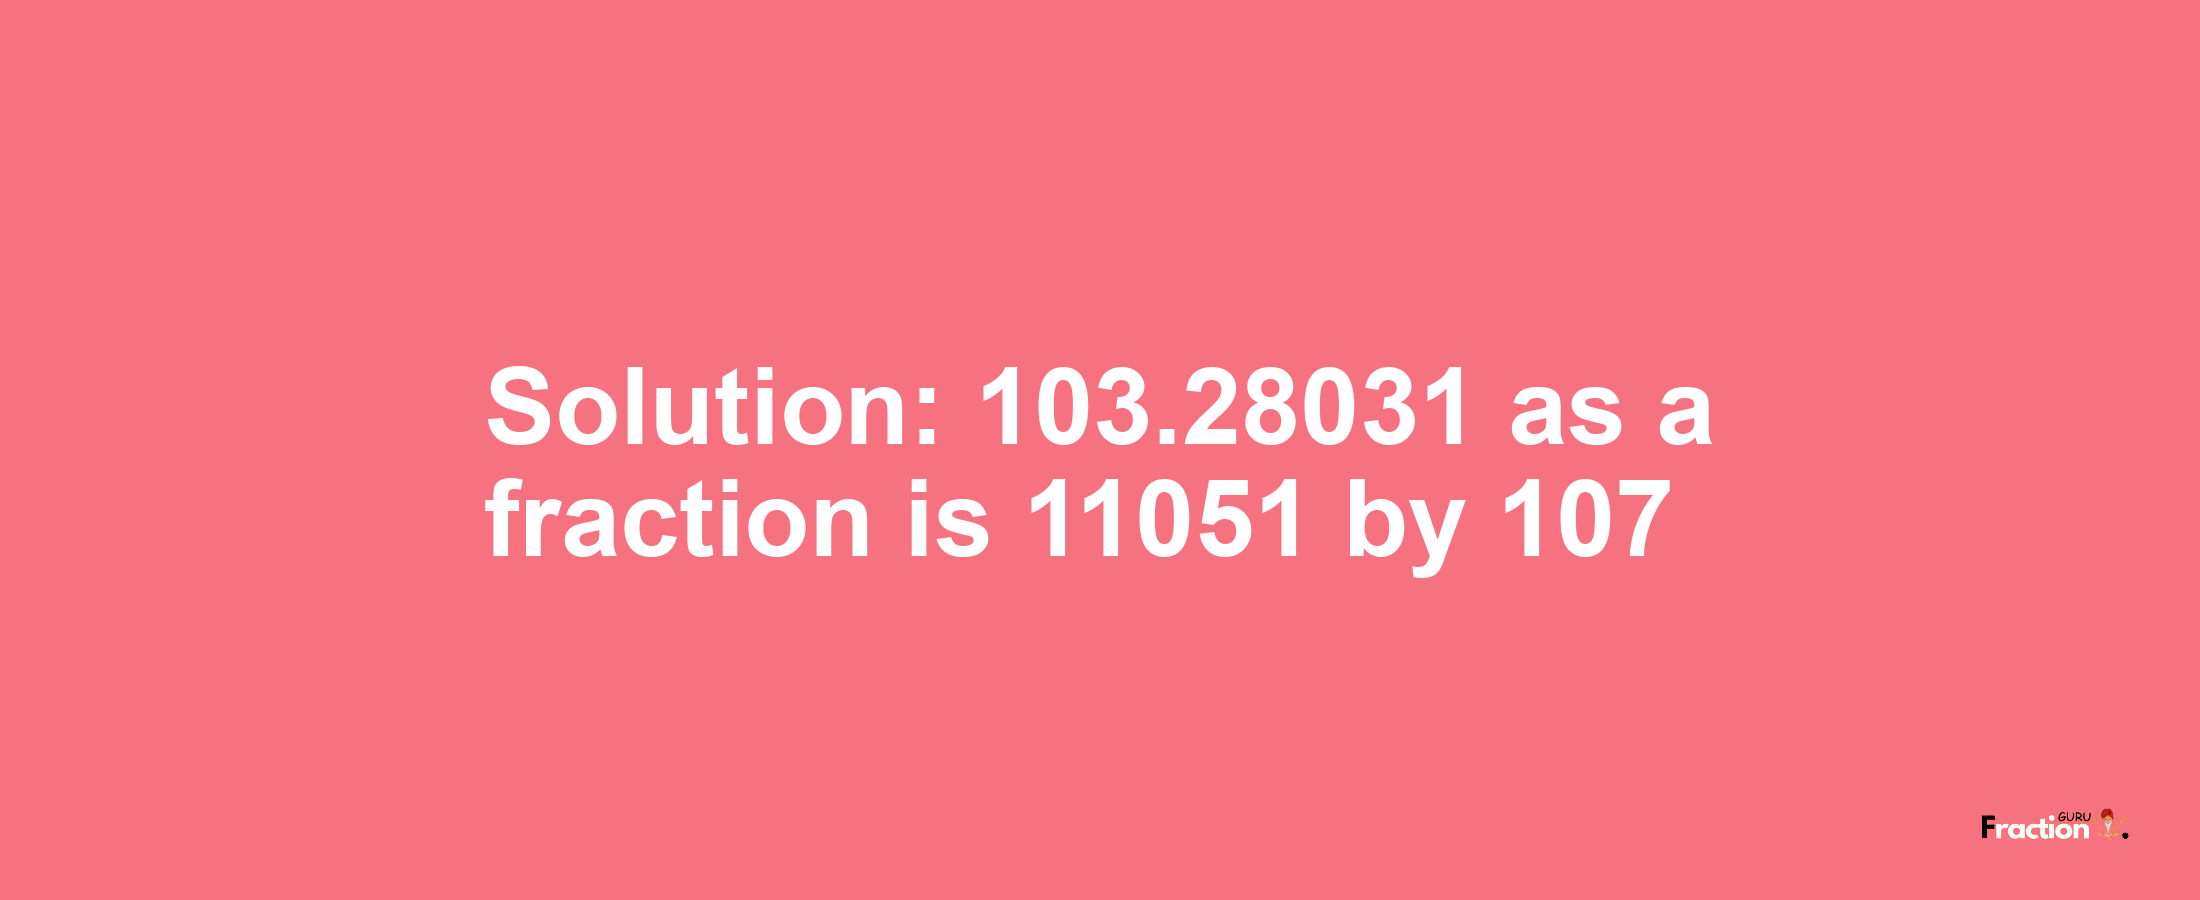 Solution:103.28031 as a fraction is 11051/107